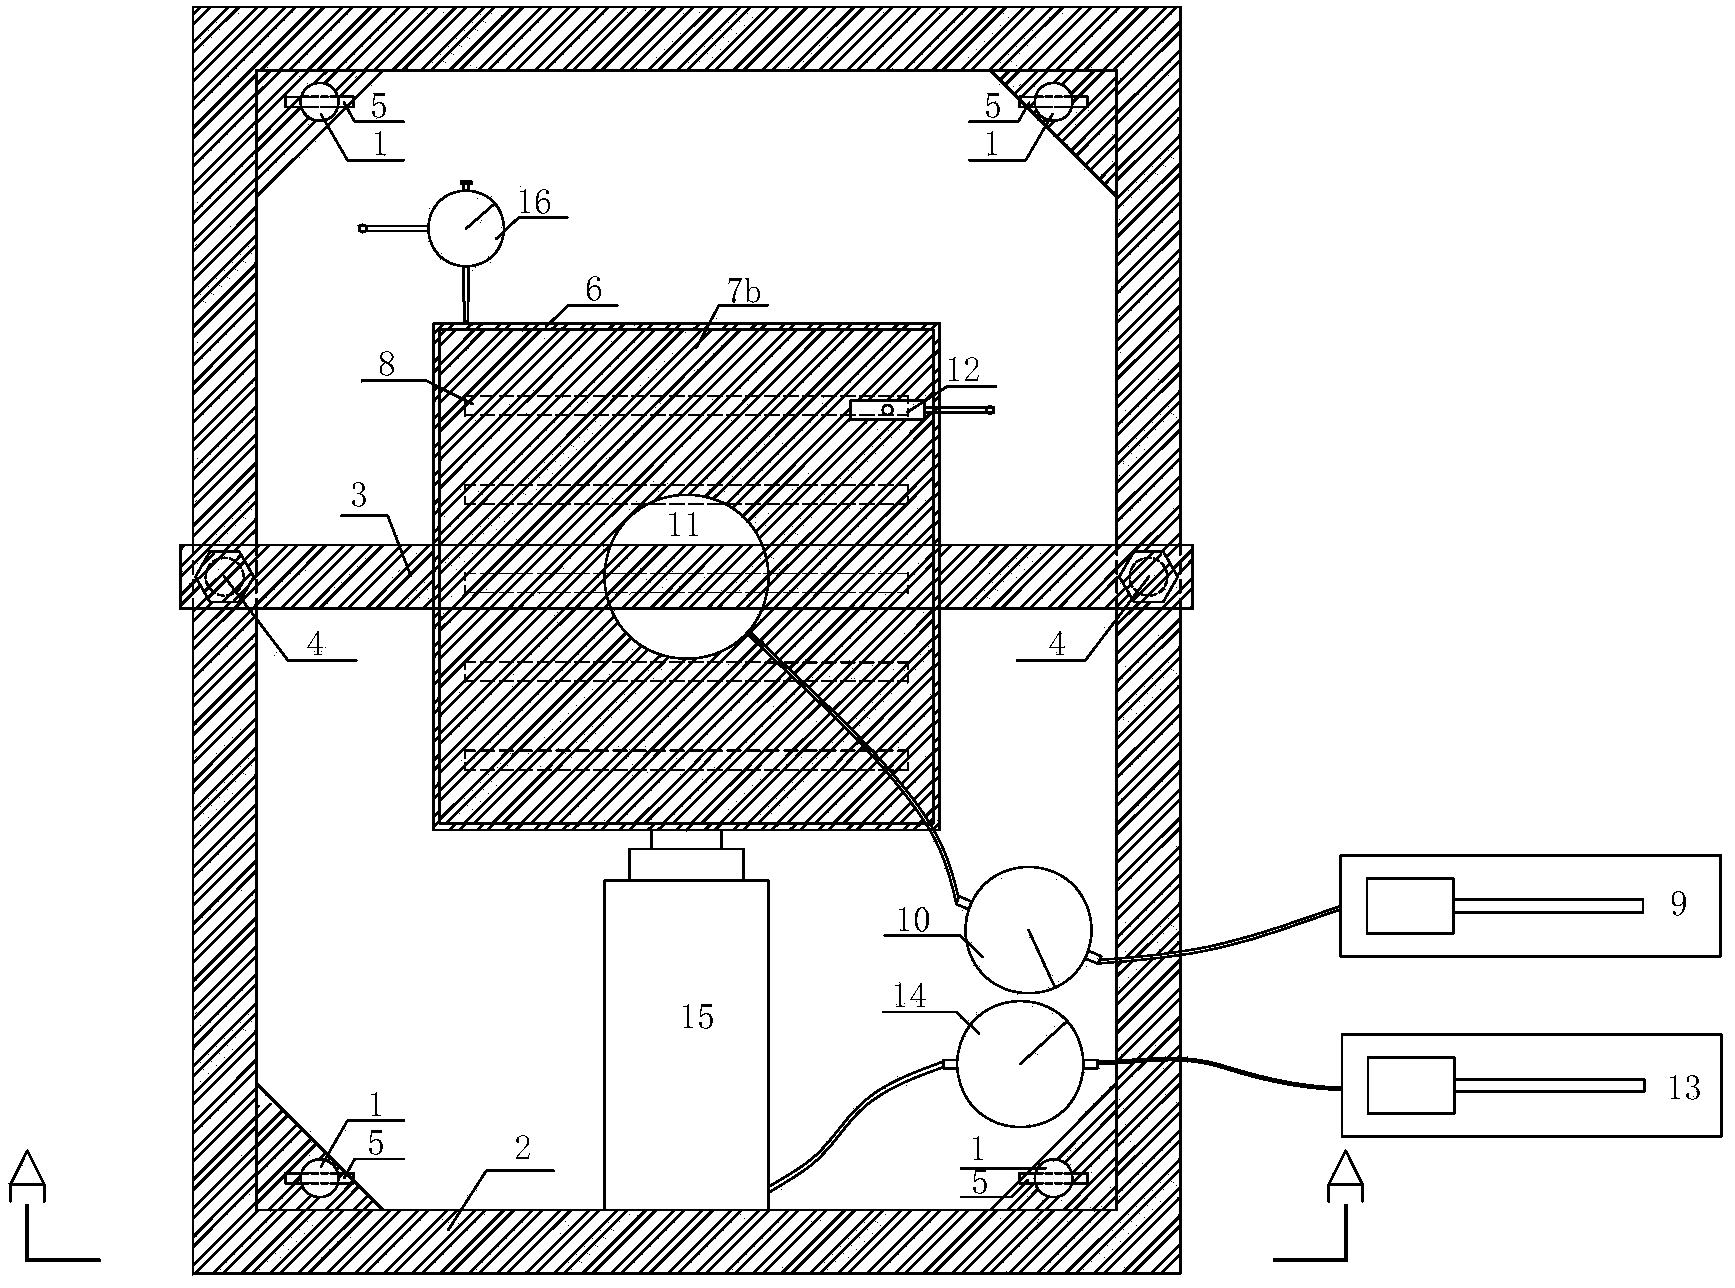 Method for detecting shear strength of clayey soil through large on-site direct shear test device